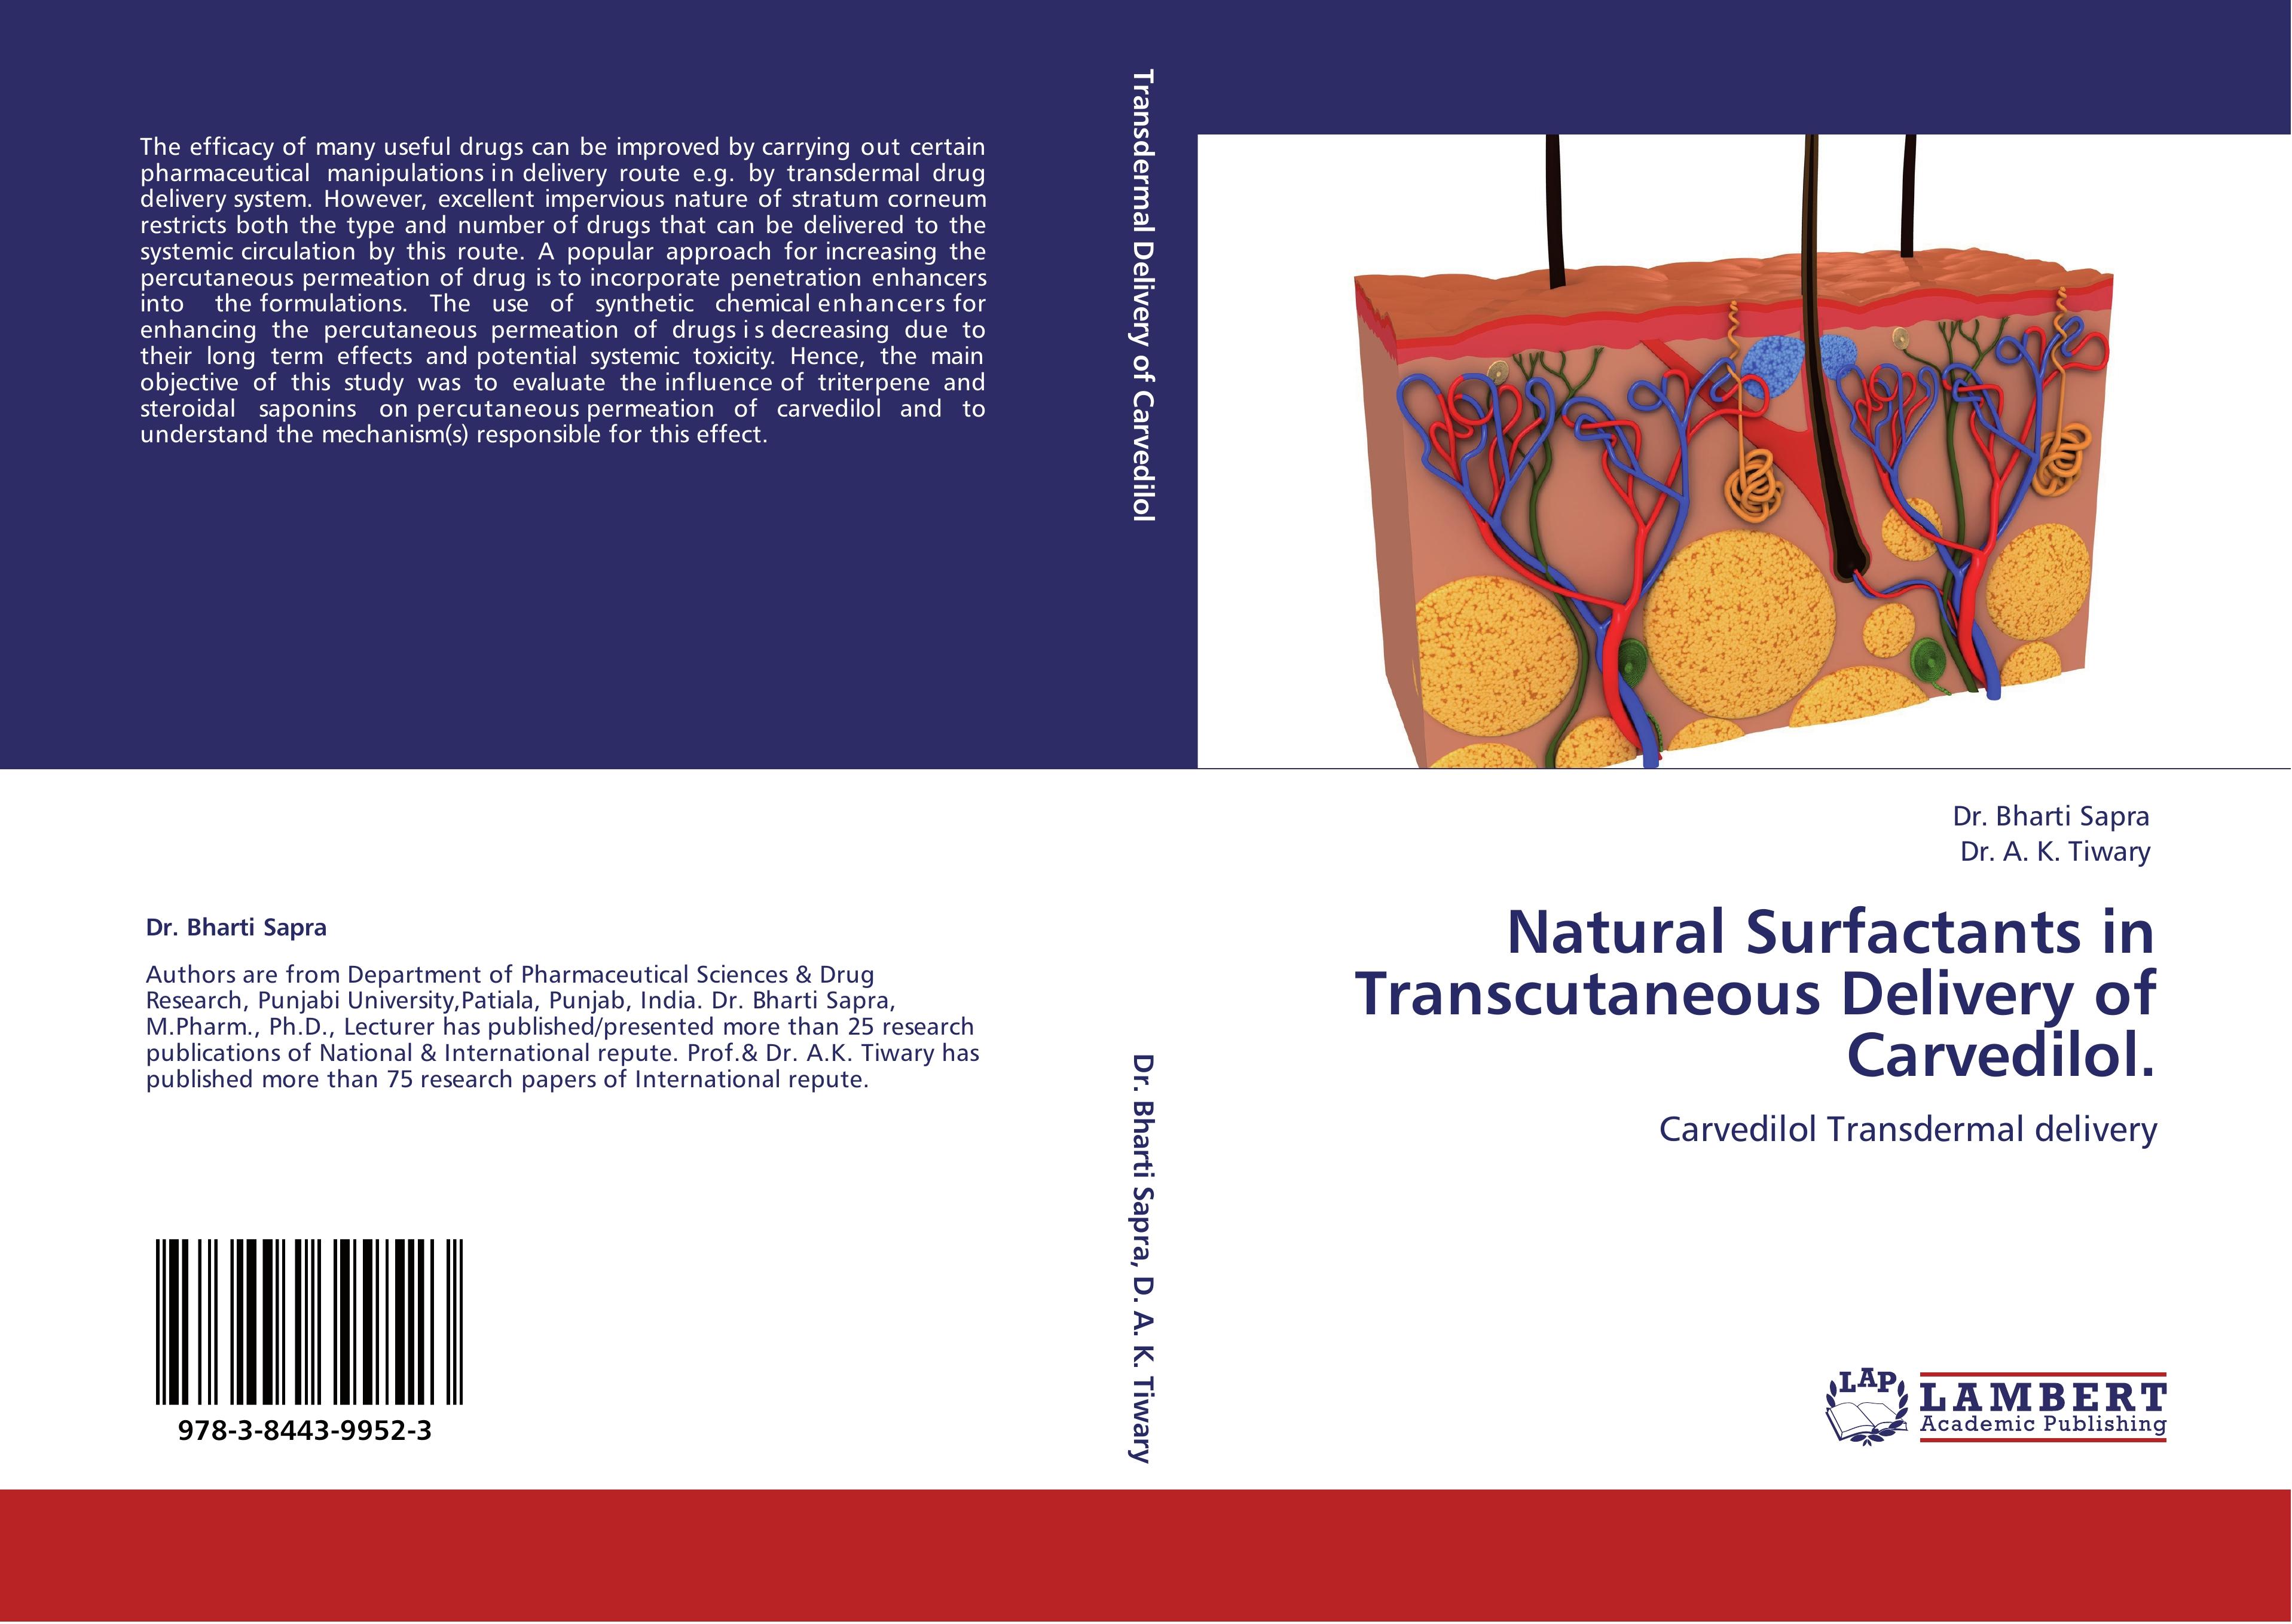 Natural Surfactants in Transcutaneous Delivery of Carvedilol - Dr. Bharti Sapra Dr. A. K. Tiwary